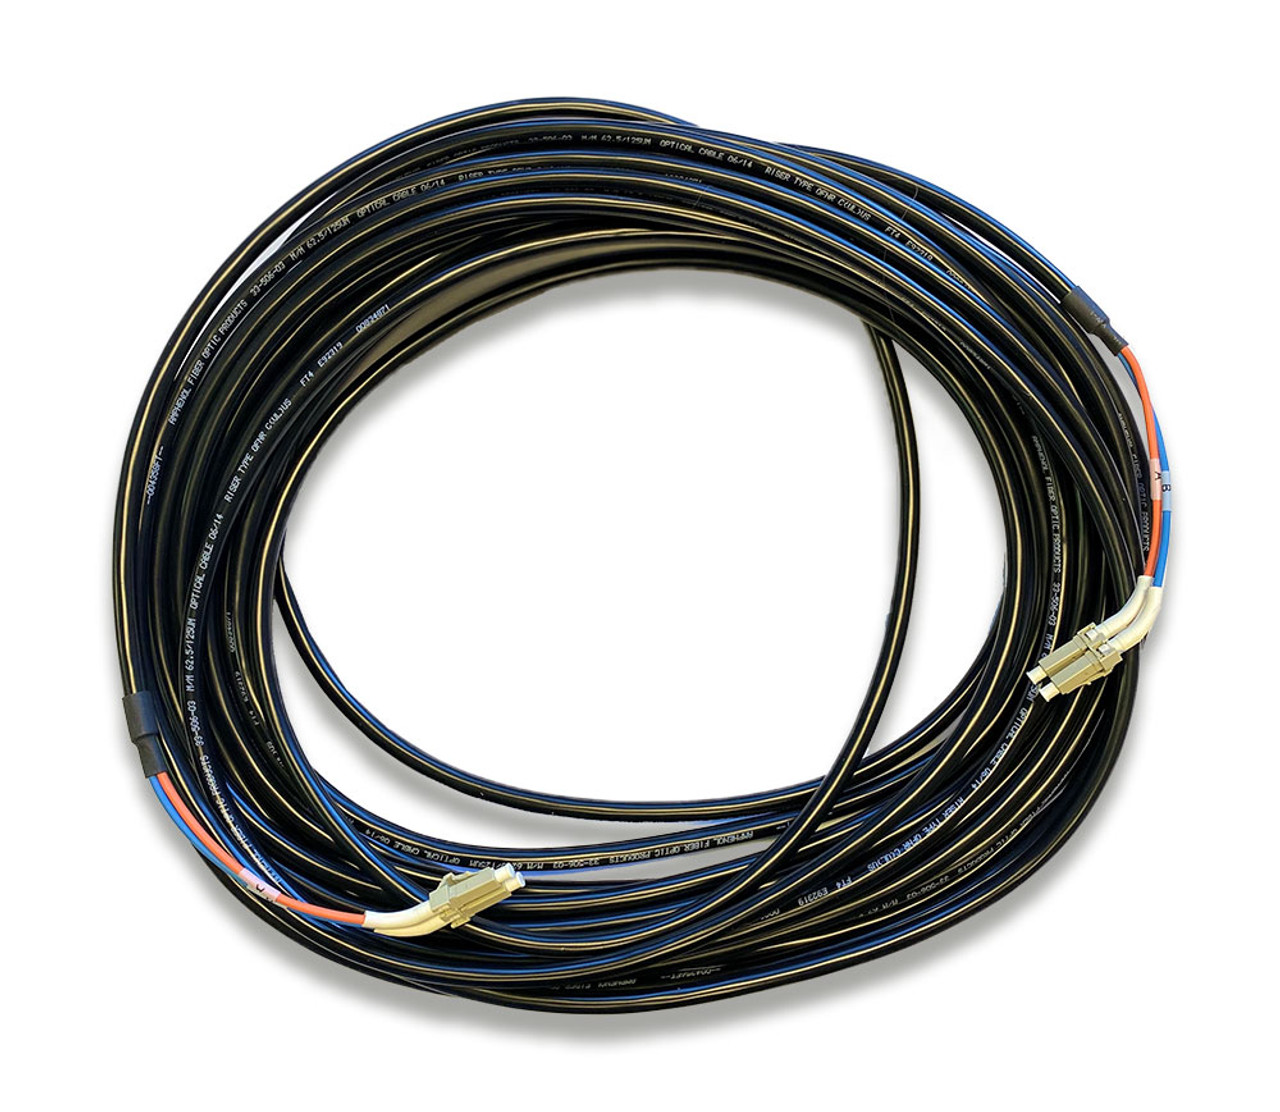 Multimode　Cable　Outdoor　LC-LC　Fiber　Patch　62.5　Indoor　15M　*Clearance*